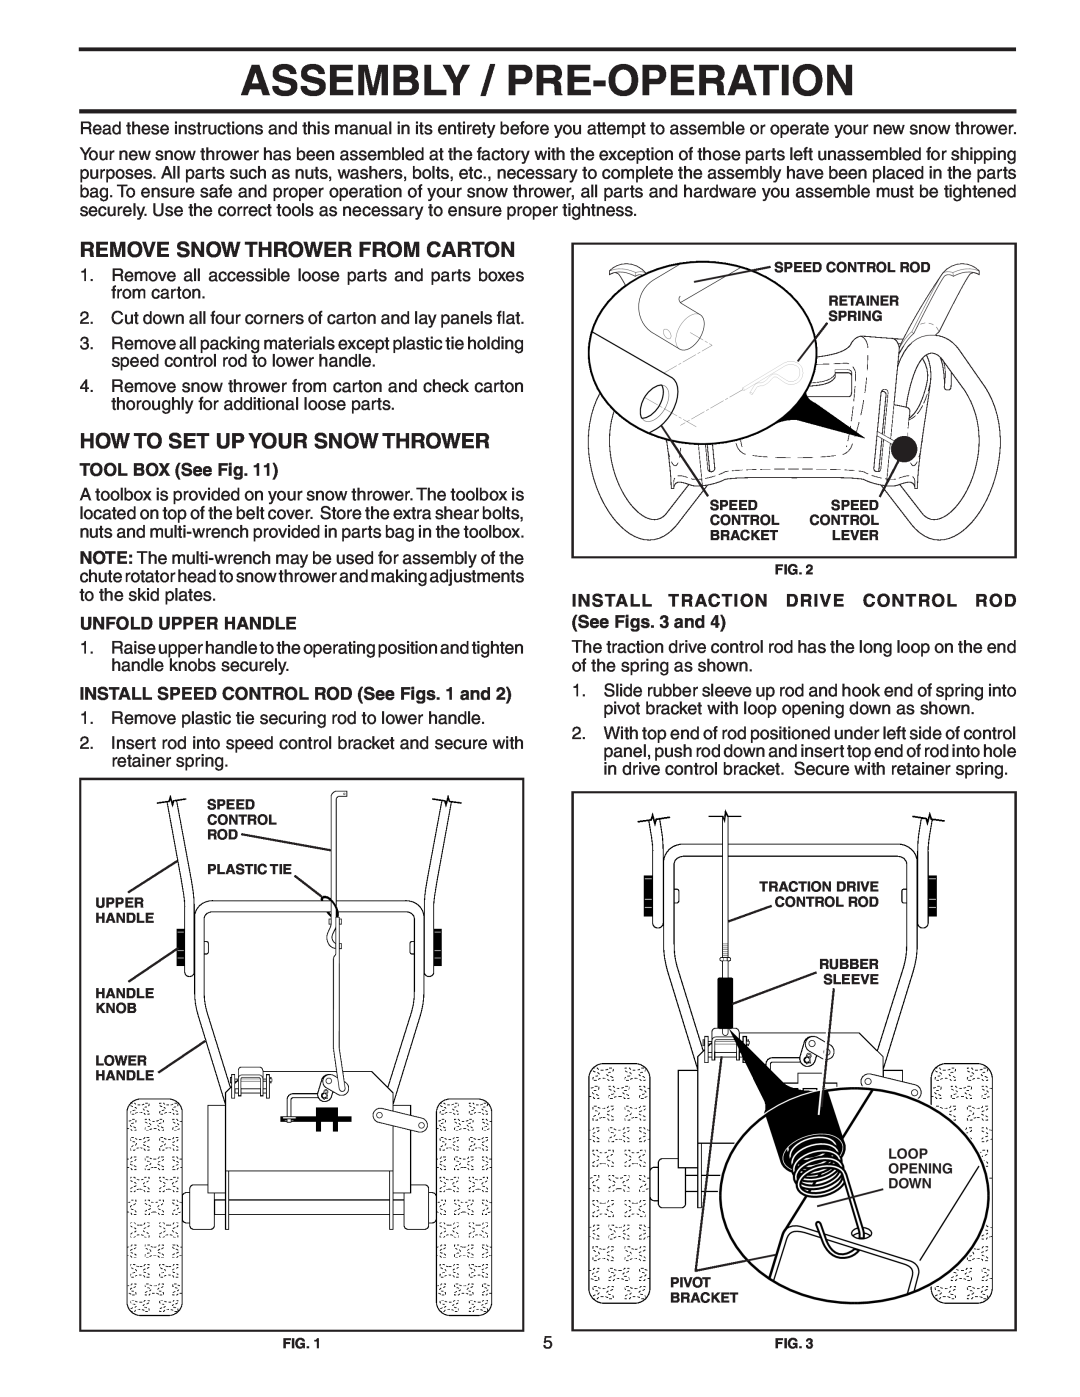 Poulan PP1130ESA owner manual Assembly / Pre-Operation, Remove Snow Thrower From Carton, How To Set Up Your Snow Thrower 